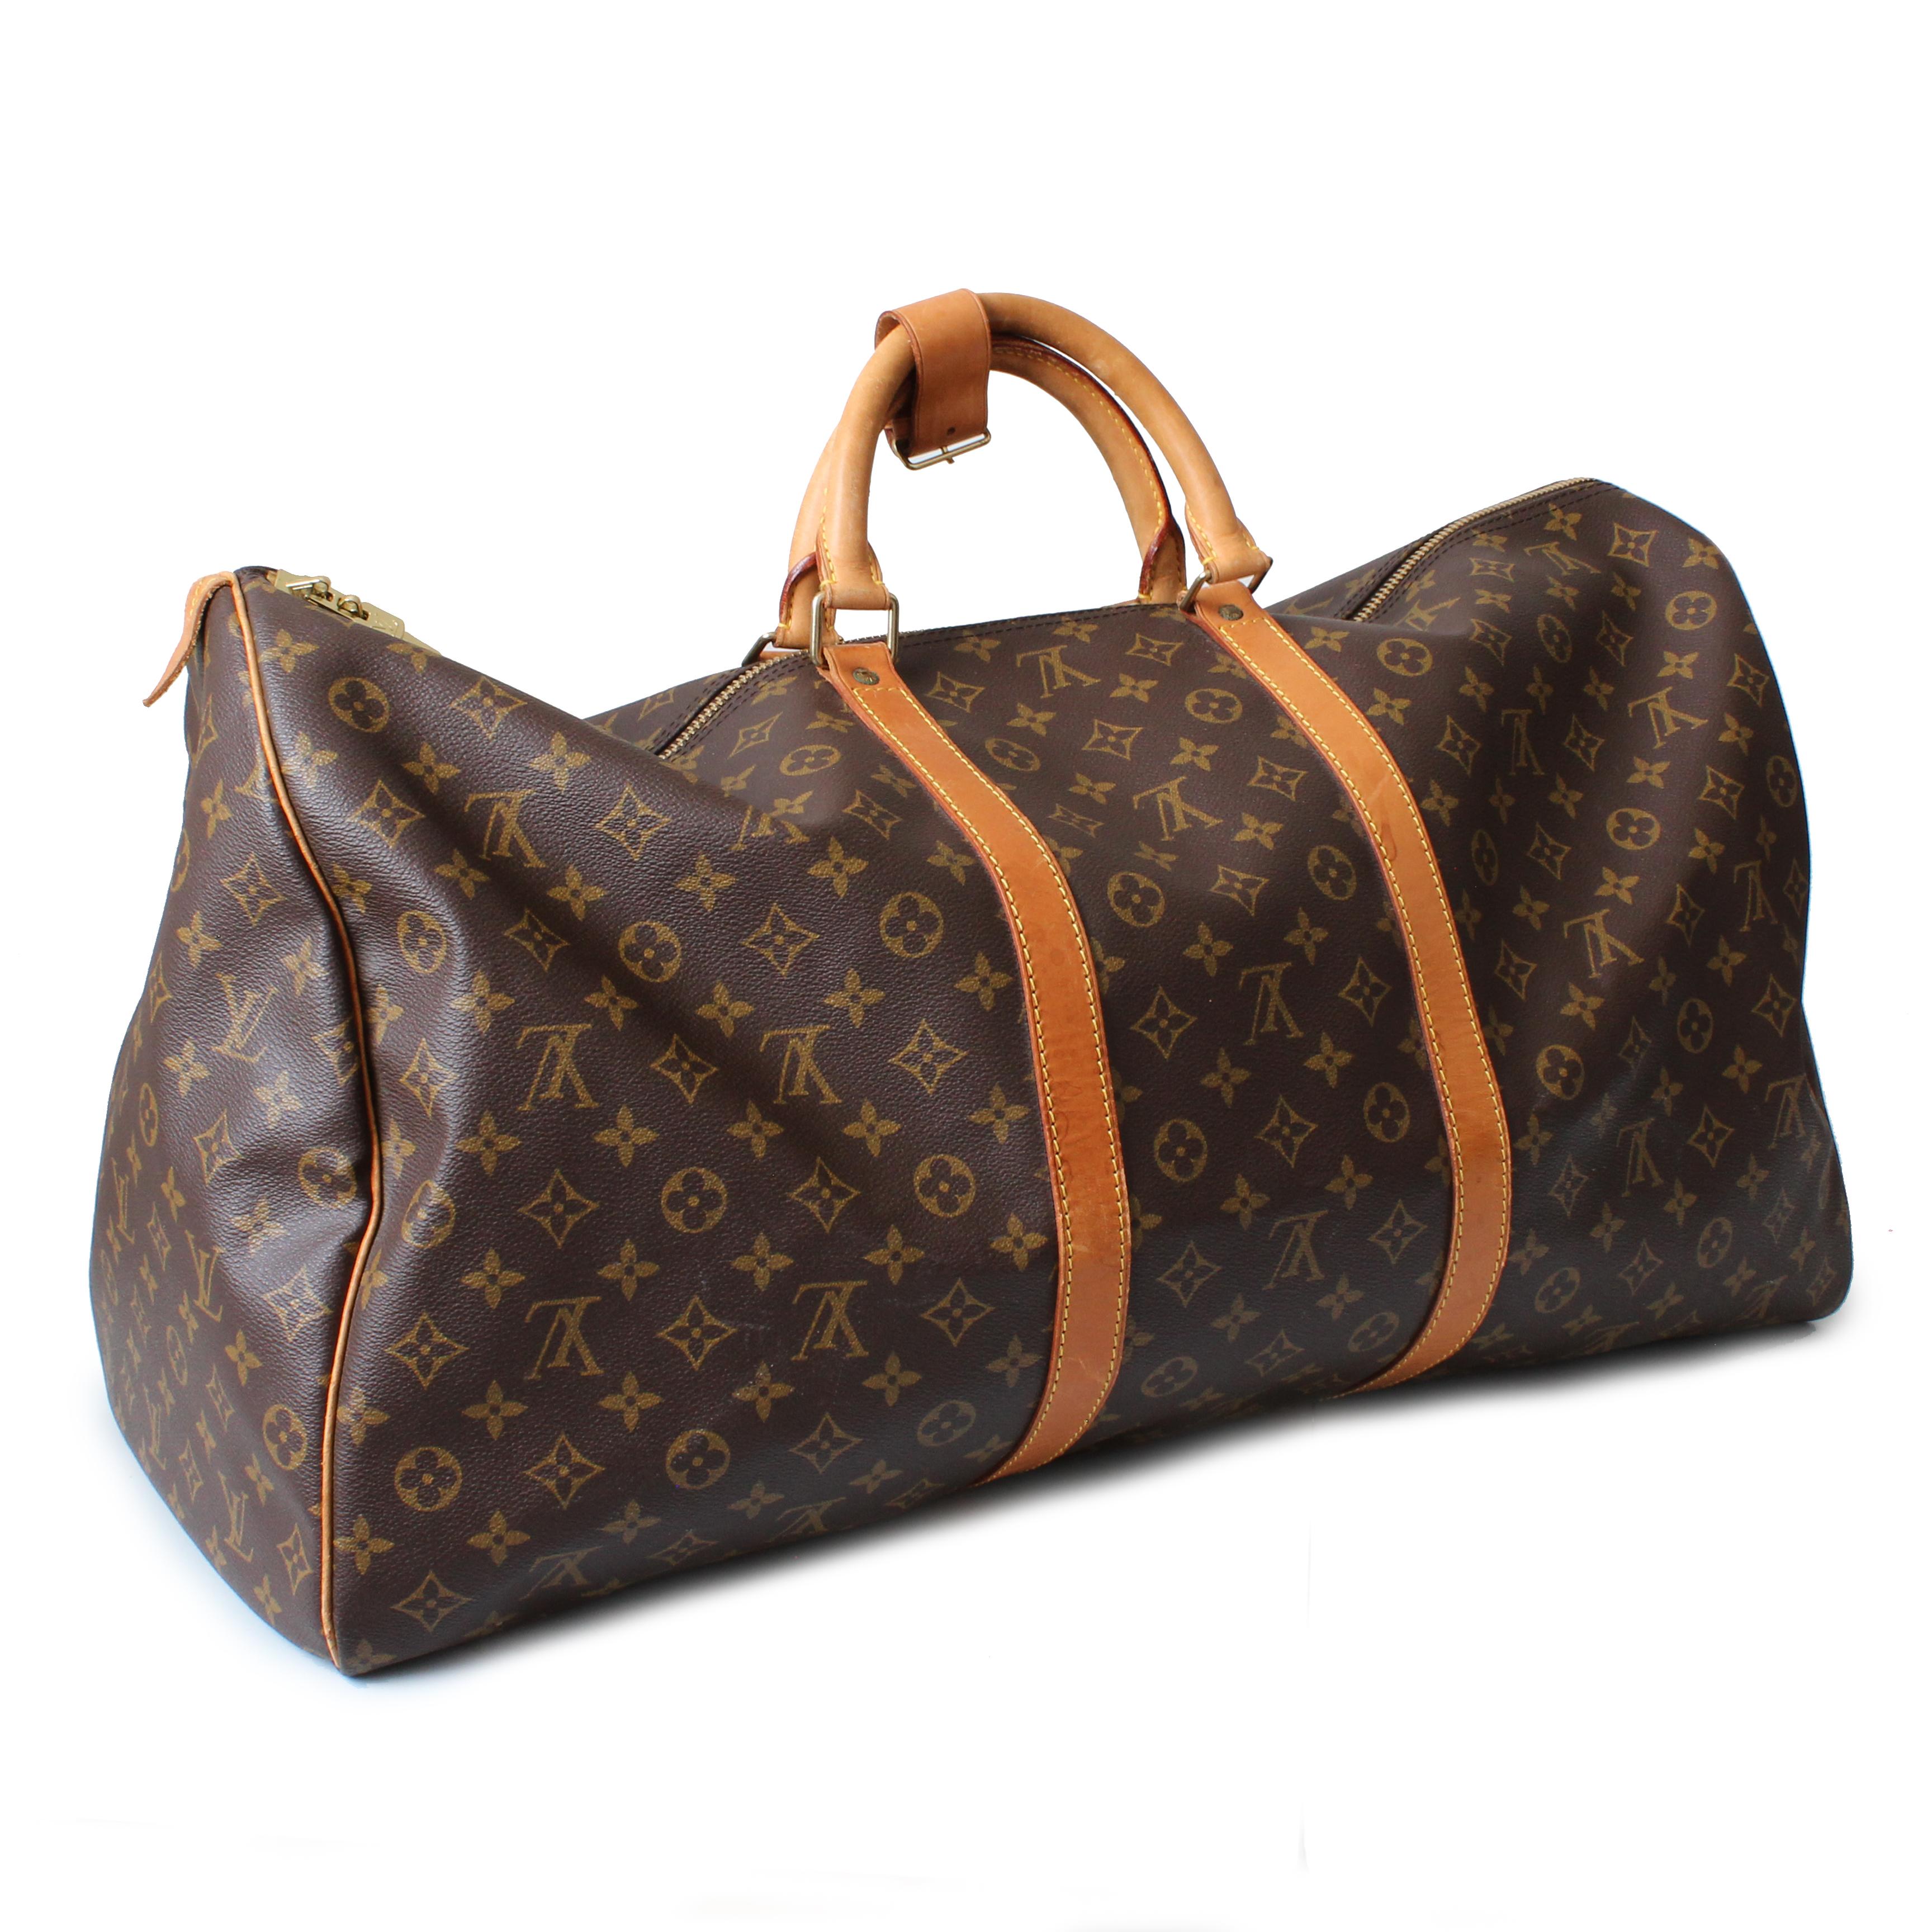 Authentic, preowned, vintage Louis Vuitton Keepall 60 Duffel Bag in Monogram Canvas, made in 1993.  Comes with handle keeper & luggage tag. Lined in canvas, double zipper closure.  Large bag that holds a TON! Measures appx 24in L x 13in H x 10in D